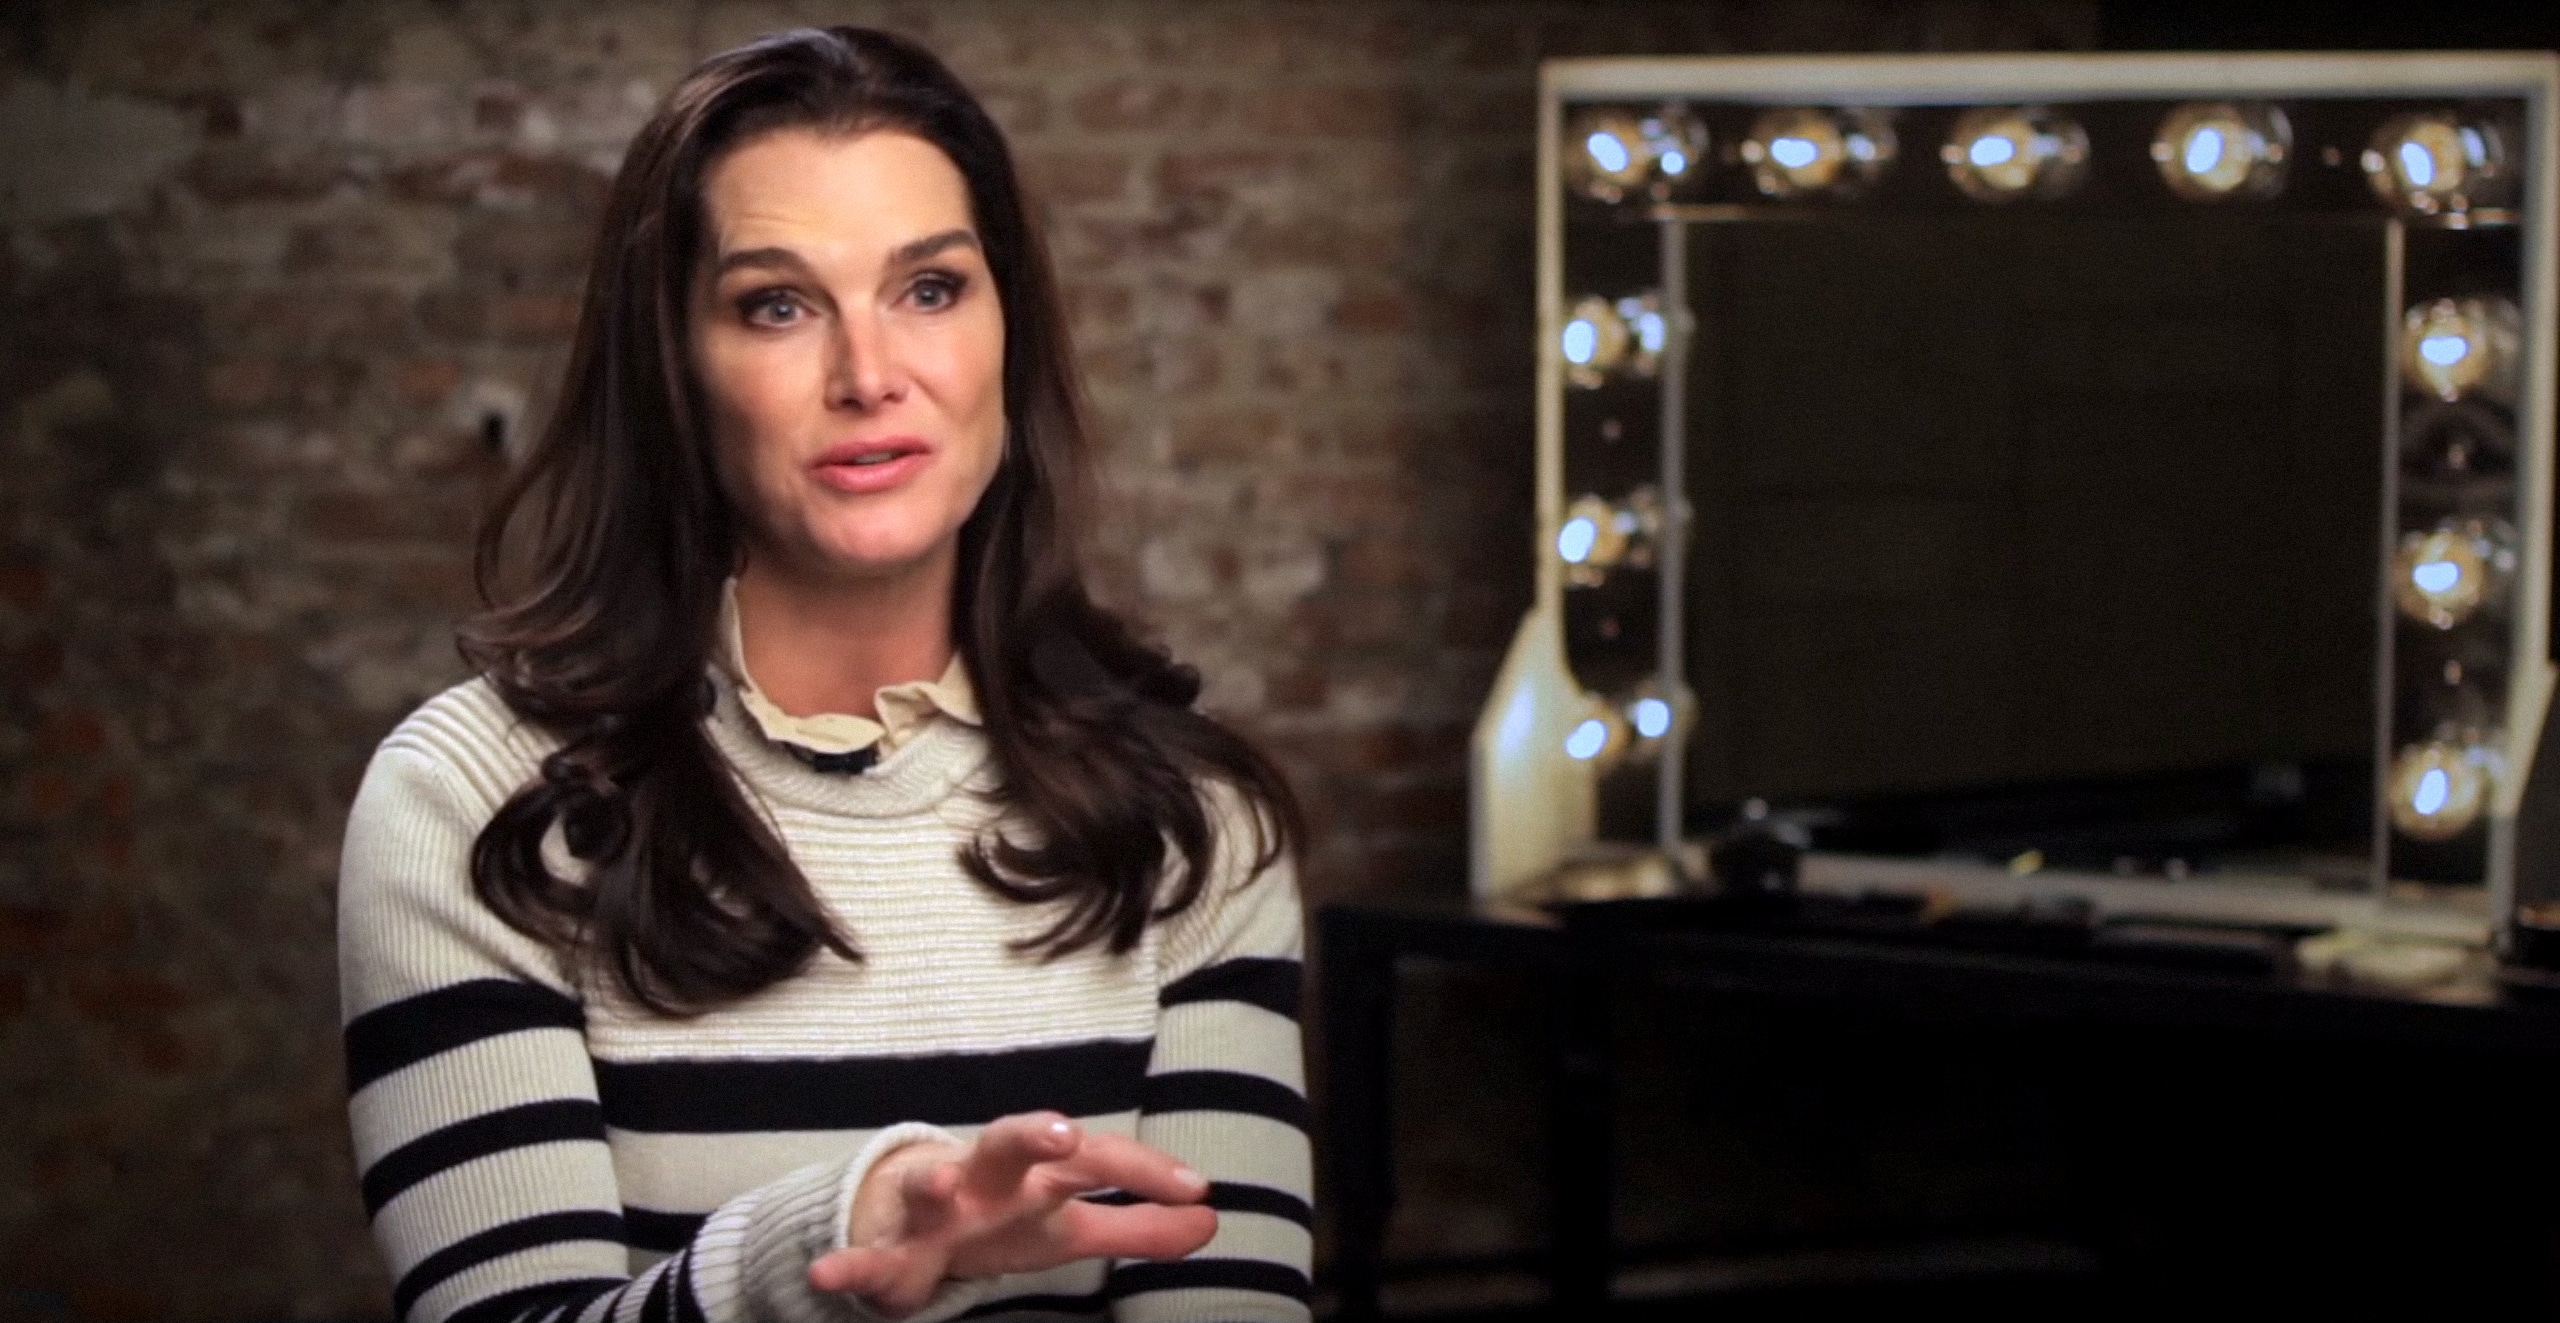 LARGER THAN LIFE: THE KEVYN AUCOIN STORY, Brooke Shields, 2018